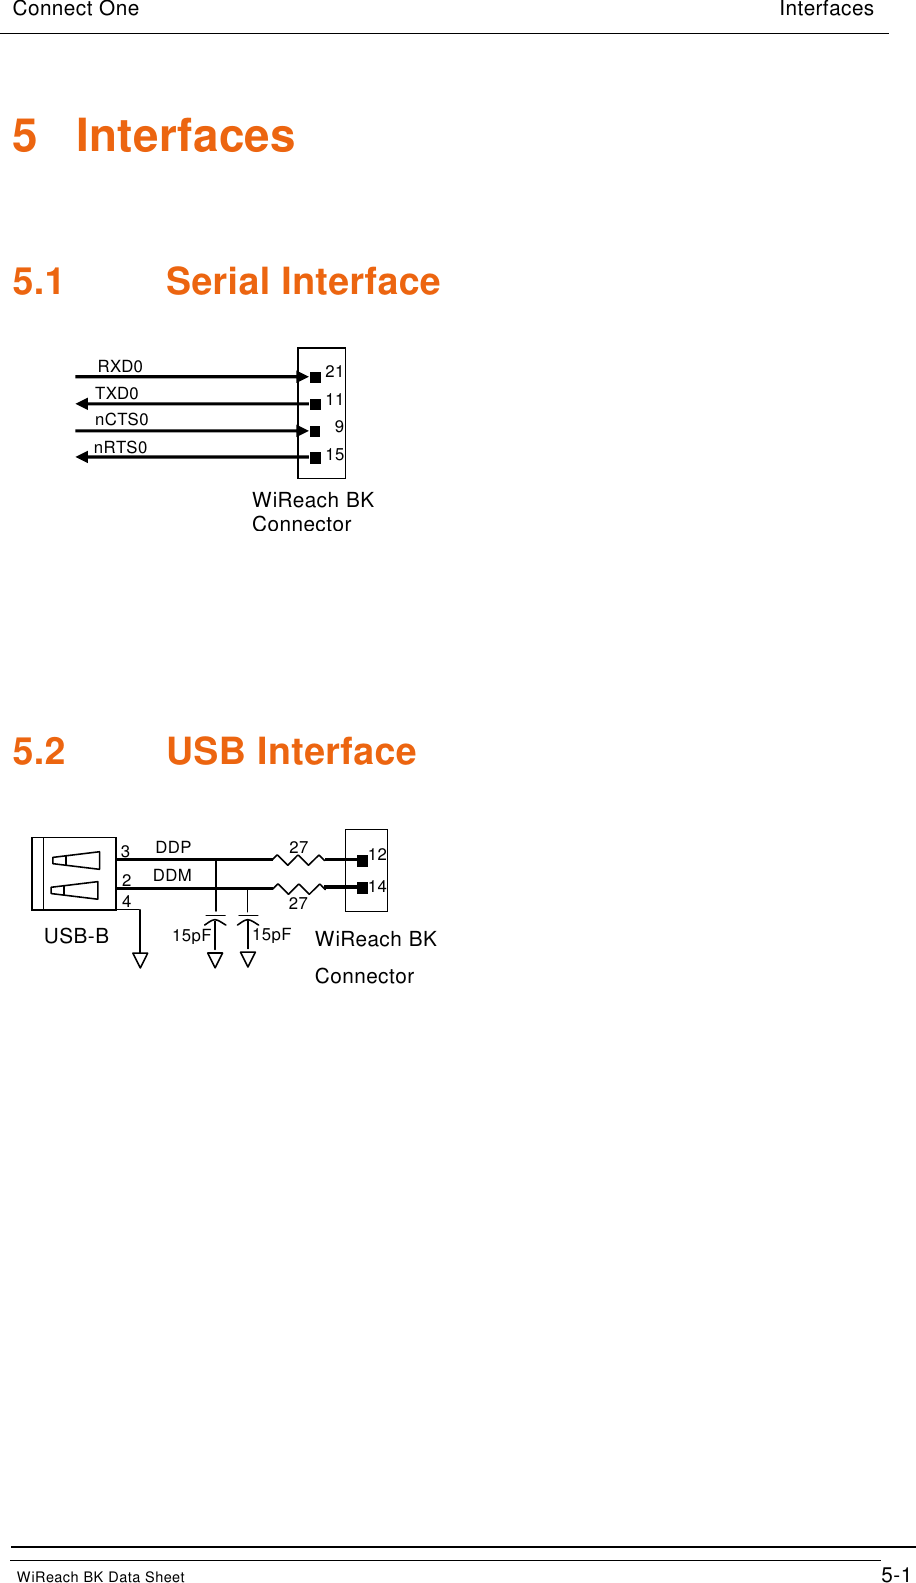 Connect One                                                     Interfaces                                                    WiReach BK Data Sheet                                         5-1 5  Interfaces  5.1  Serial Interface           5.2  USB Interface               12 14 DDP DDM WiReach BK Connector 2 3 USB-B 27 27 15pF 15pF 4 21 11 9 15  RXD0 TXD0 nCTS0 nRTS0 WiReach BK Connector 